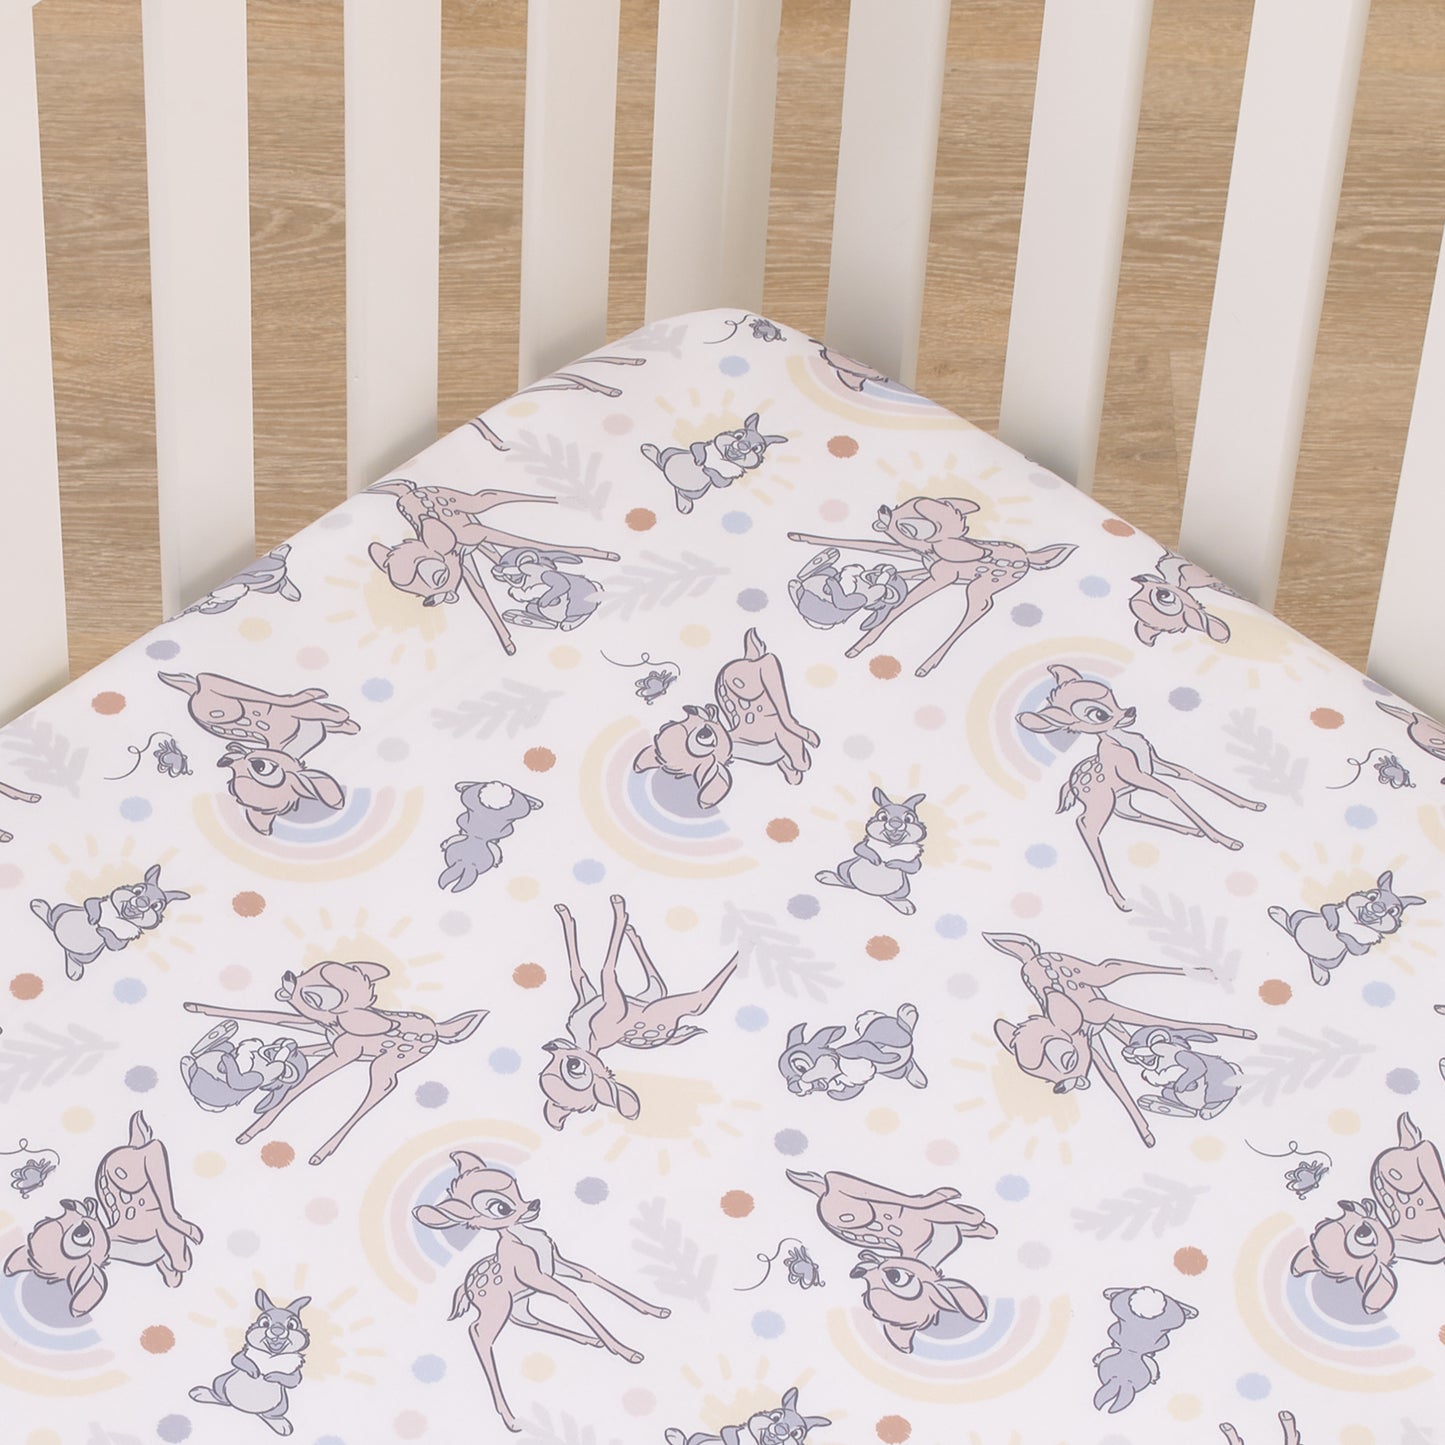 Disney B is for Bambi Tan, Gray, and White Nursery Fitted Mini Crib Sheet